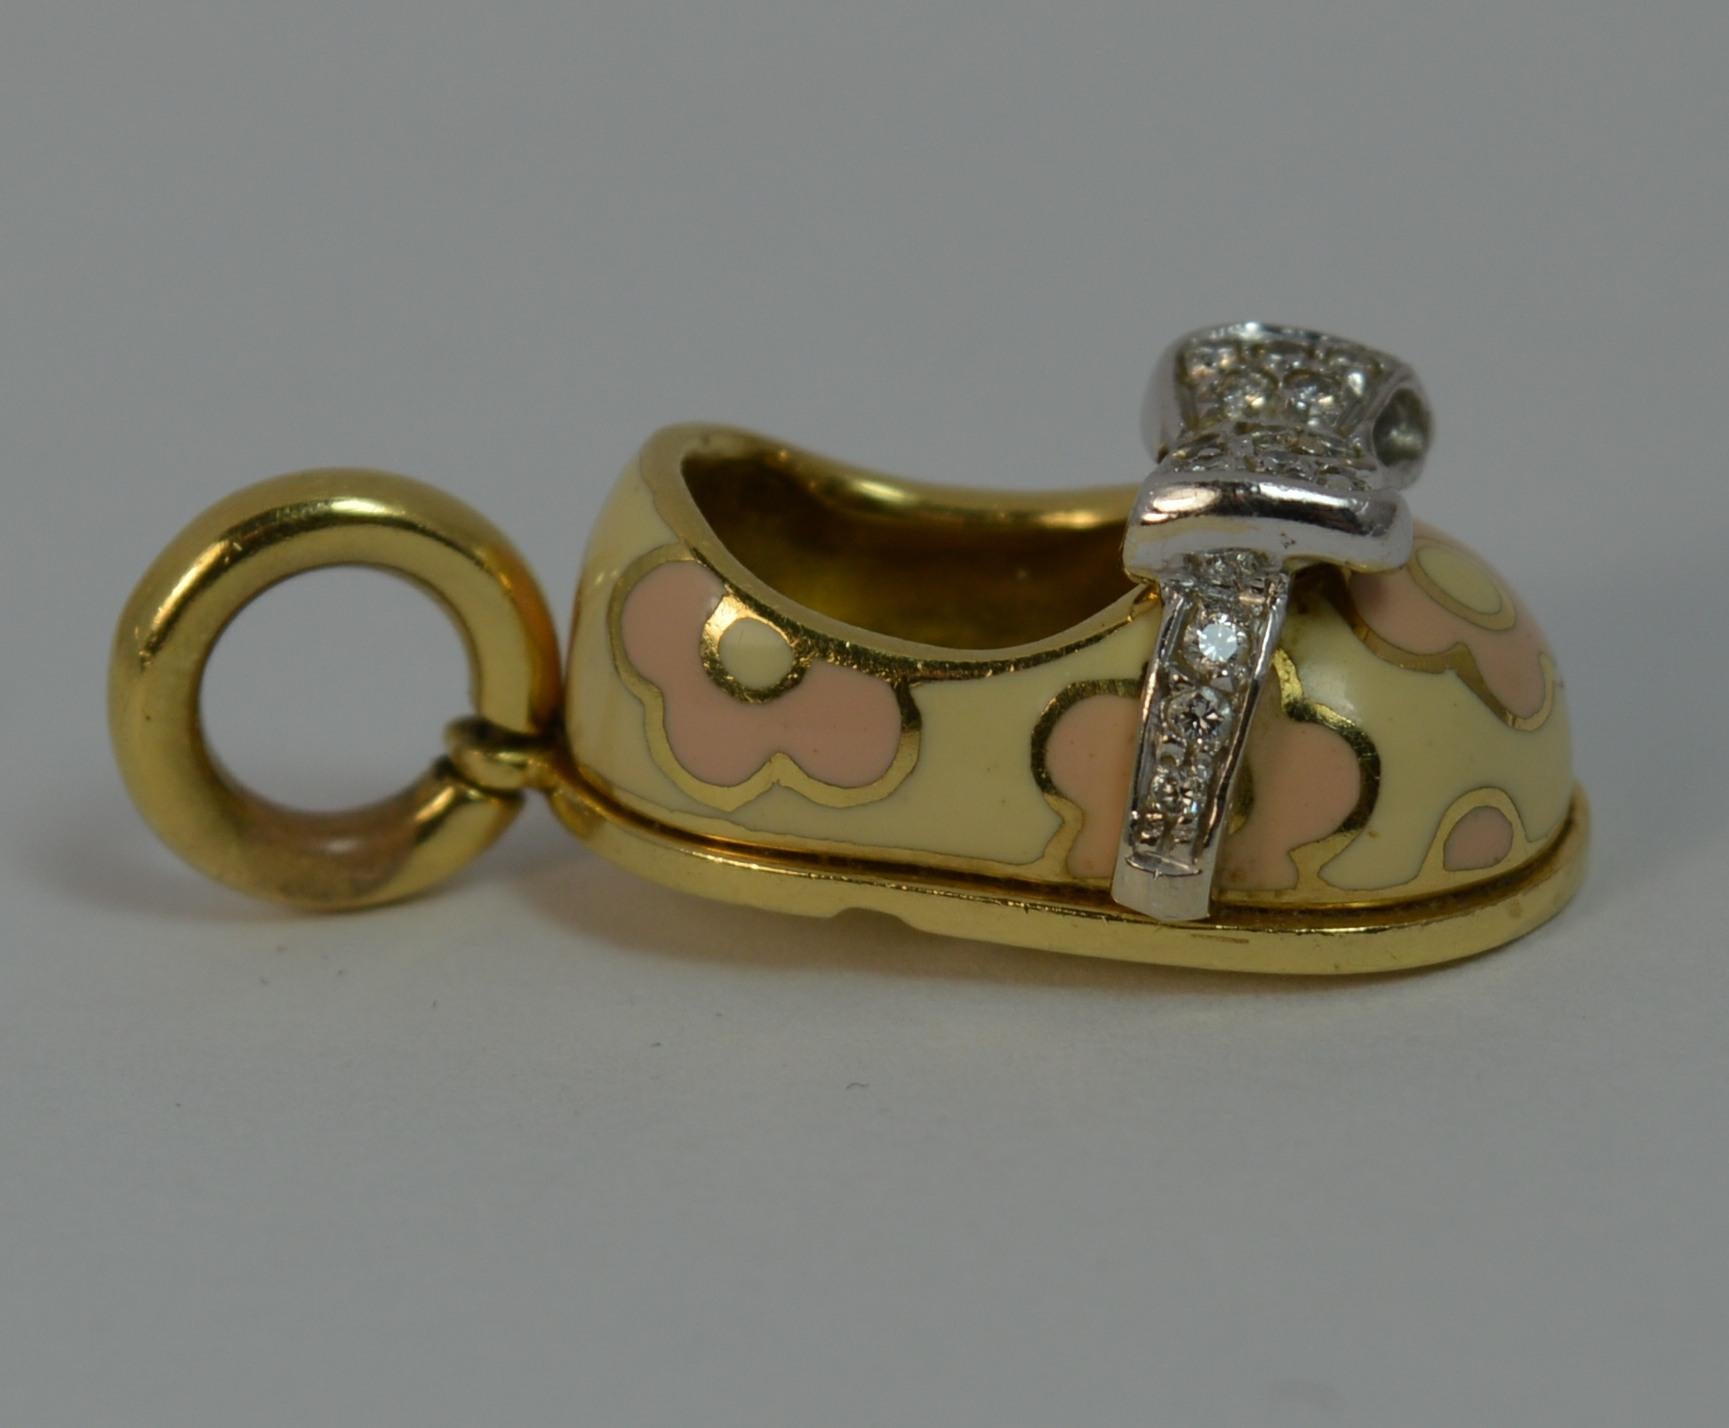 

A stunning genuine AARON BASHA charm or pendant.

Solid 18 carat yellow gold example.

Designed with pink and cream enamel with bow top.

Formed in the shape of a cute baby shoe.

No longer a current model though based on very similar examples